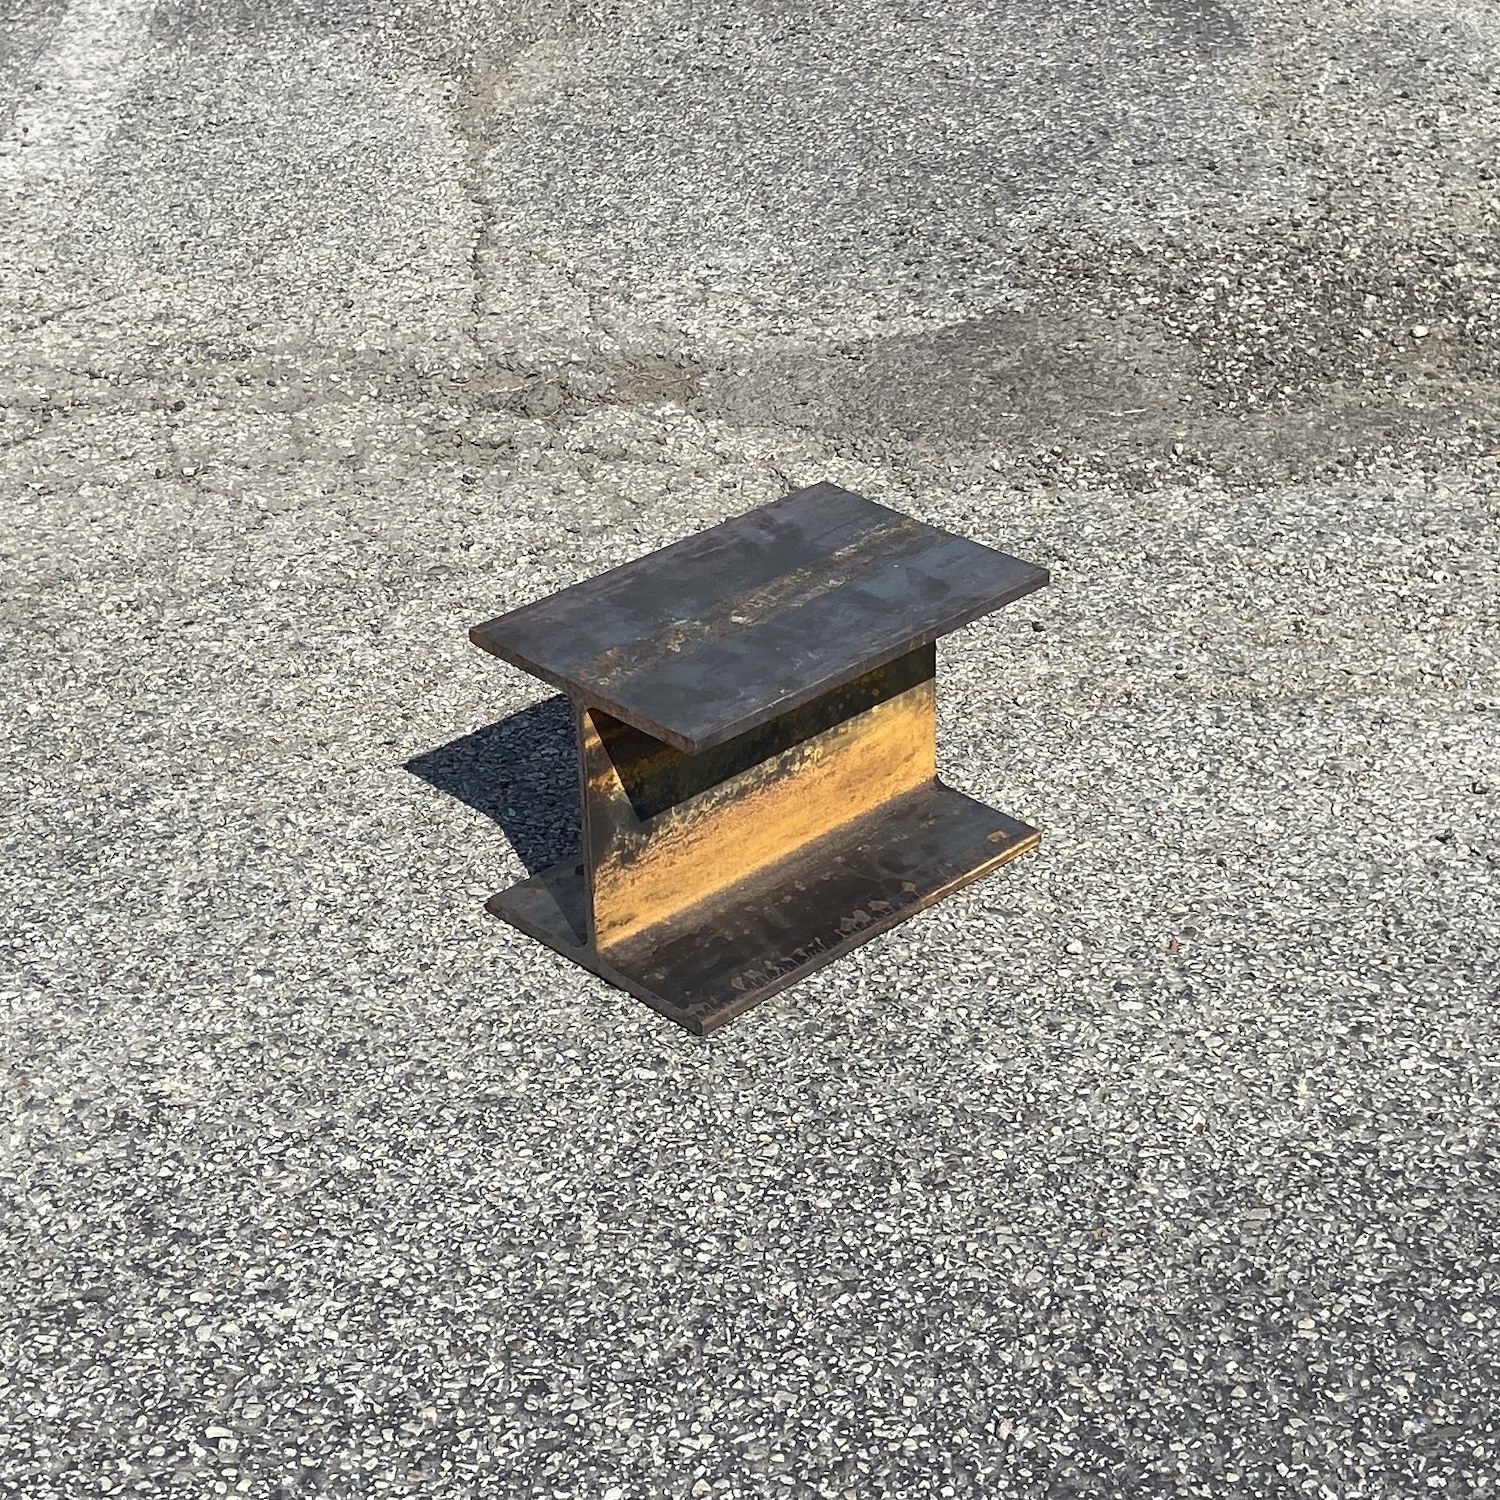 An anvil made out of steel I-beam, photographed in a parking lot.